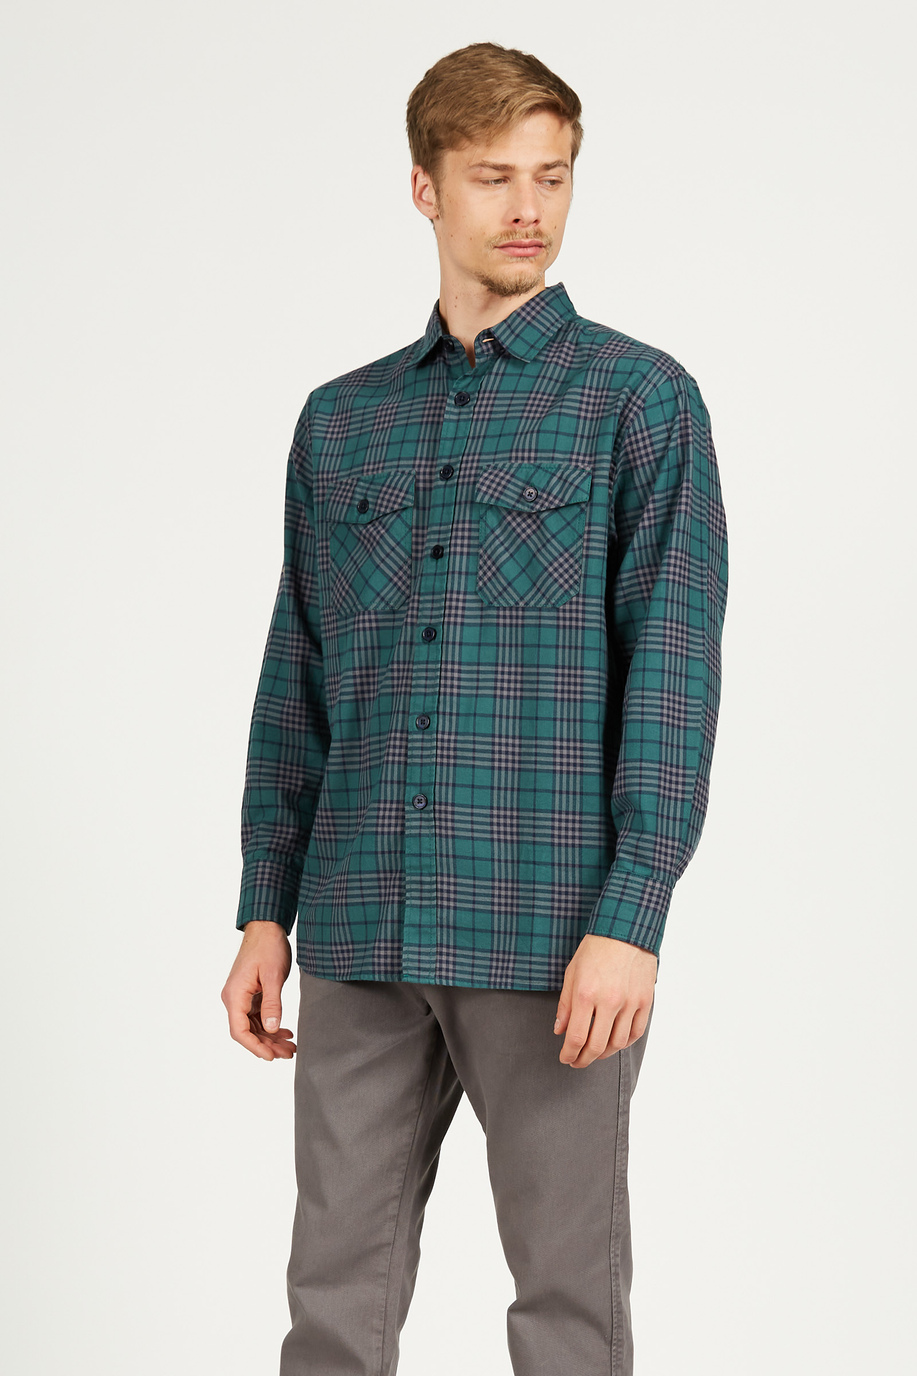 Men's shirt in cotton with long sleeves, oversized fit - Shirts | La Martina - Official Online Shop